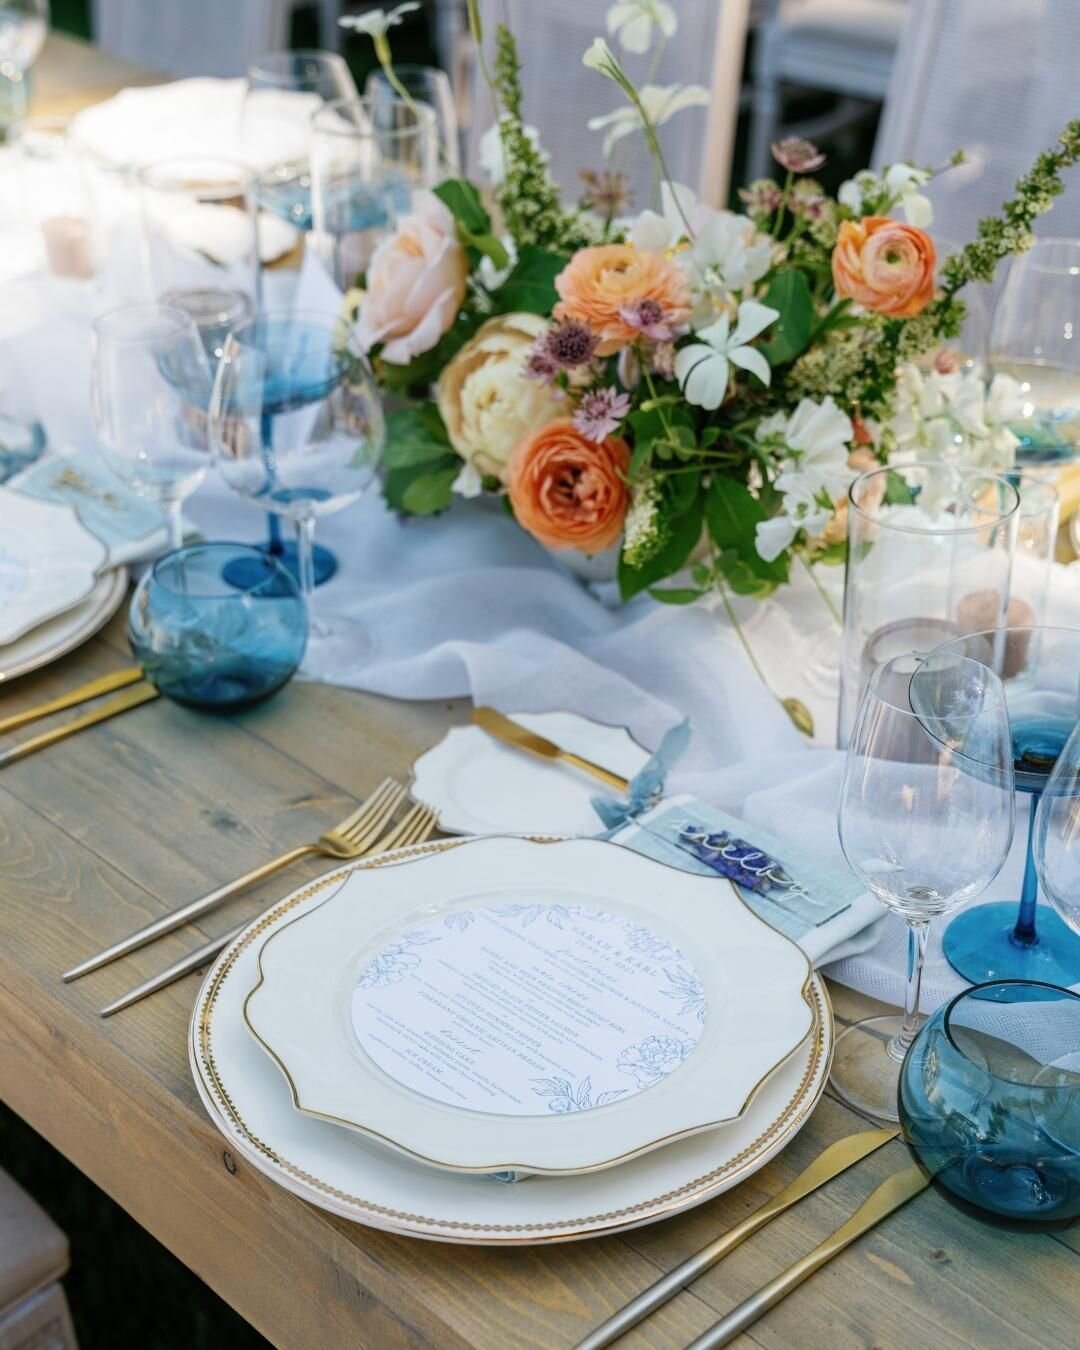 Using Sarah's dress design as our inspiration for color palette, we melded soft peaches, corals and cream with tasteful touches of blues to create a mouthwatering feast for the eyes.

#weddingtable #weddingreception #weddingcolors #weddingplanner #lu